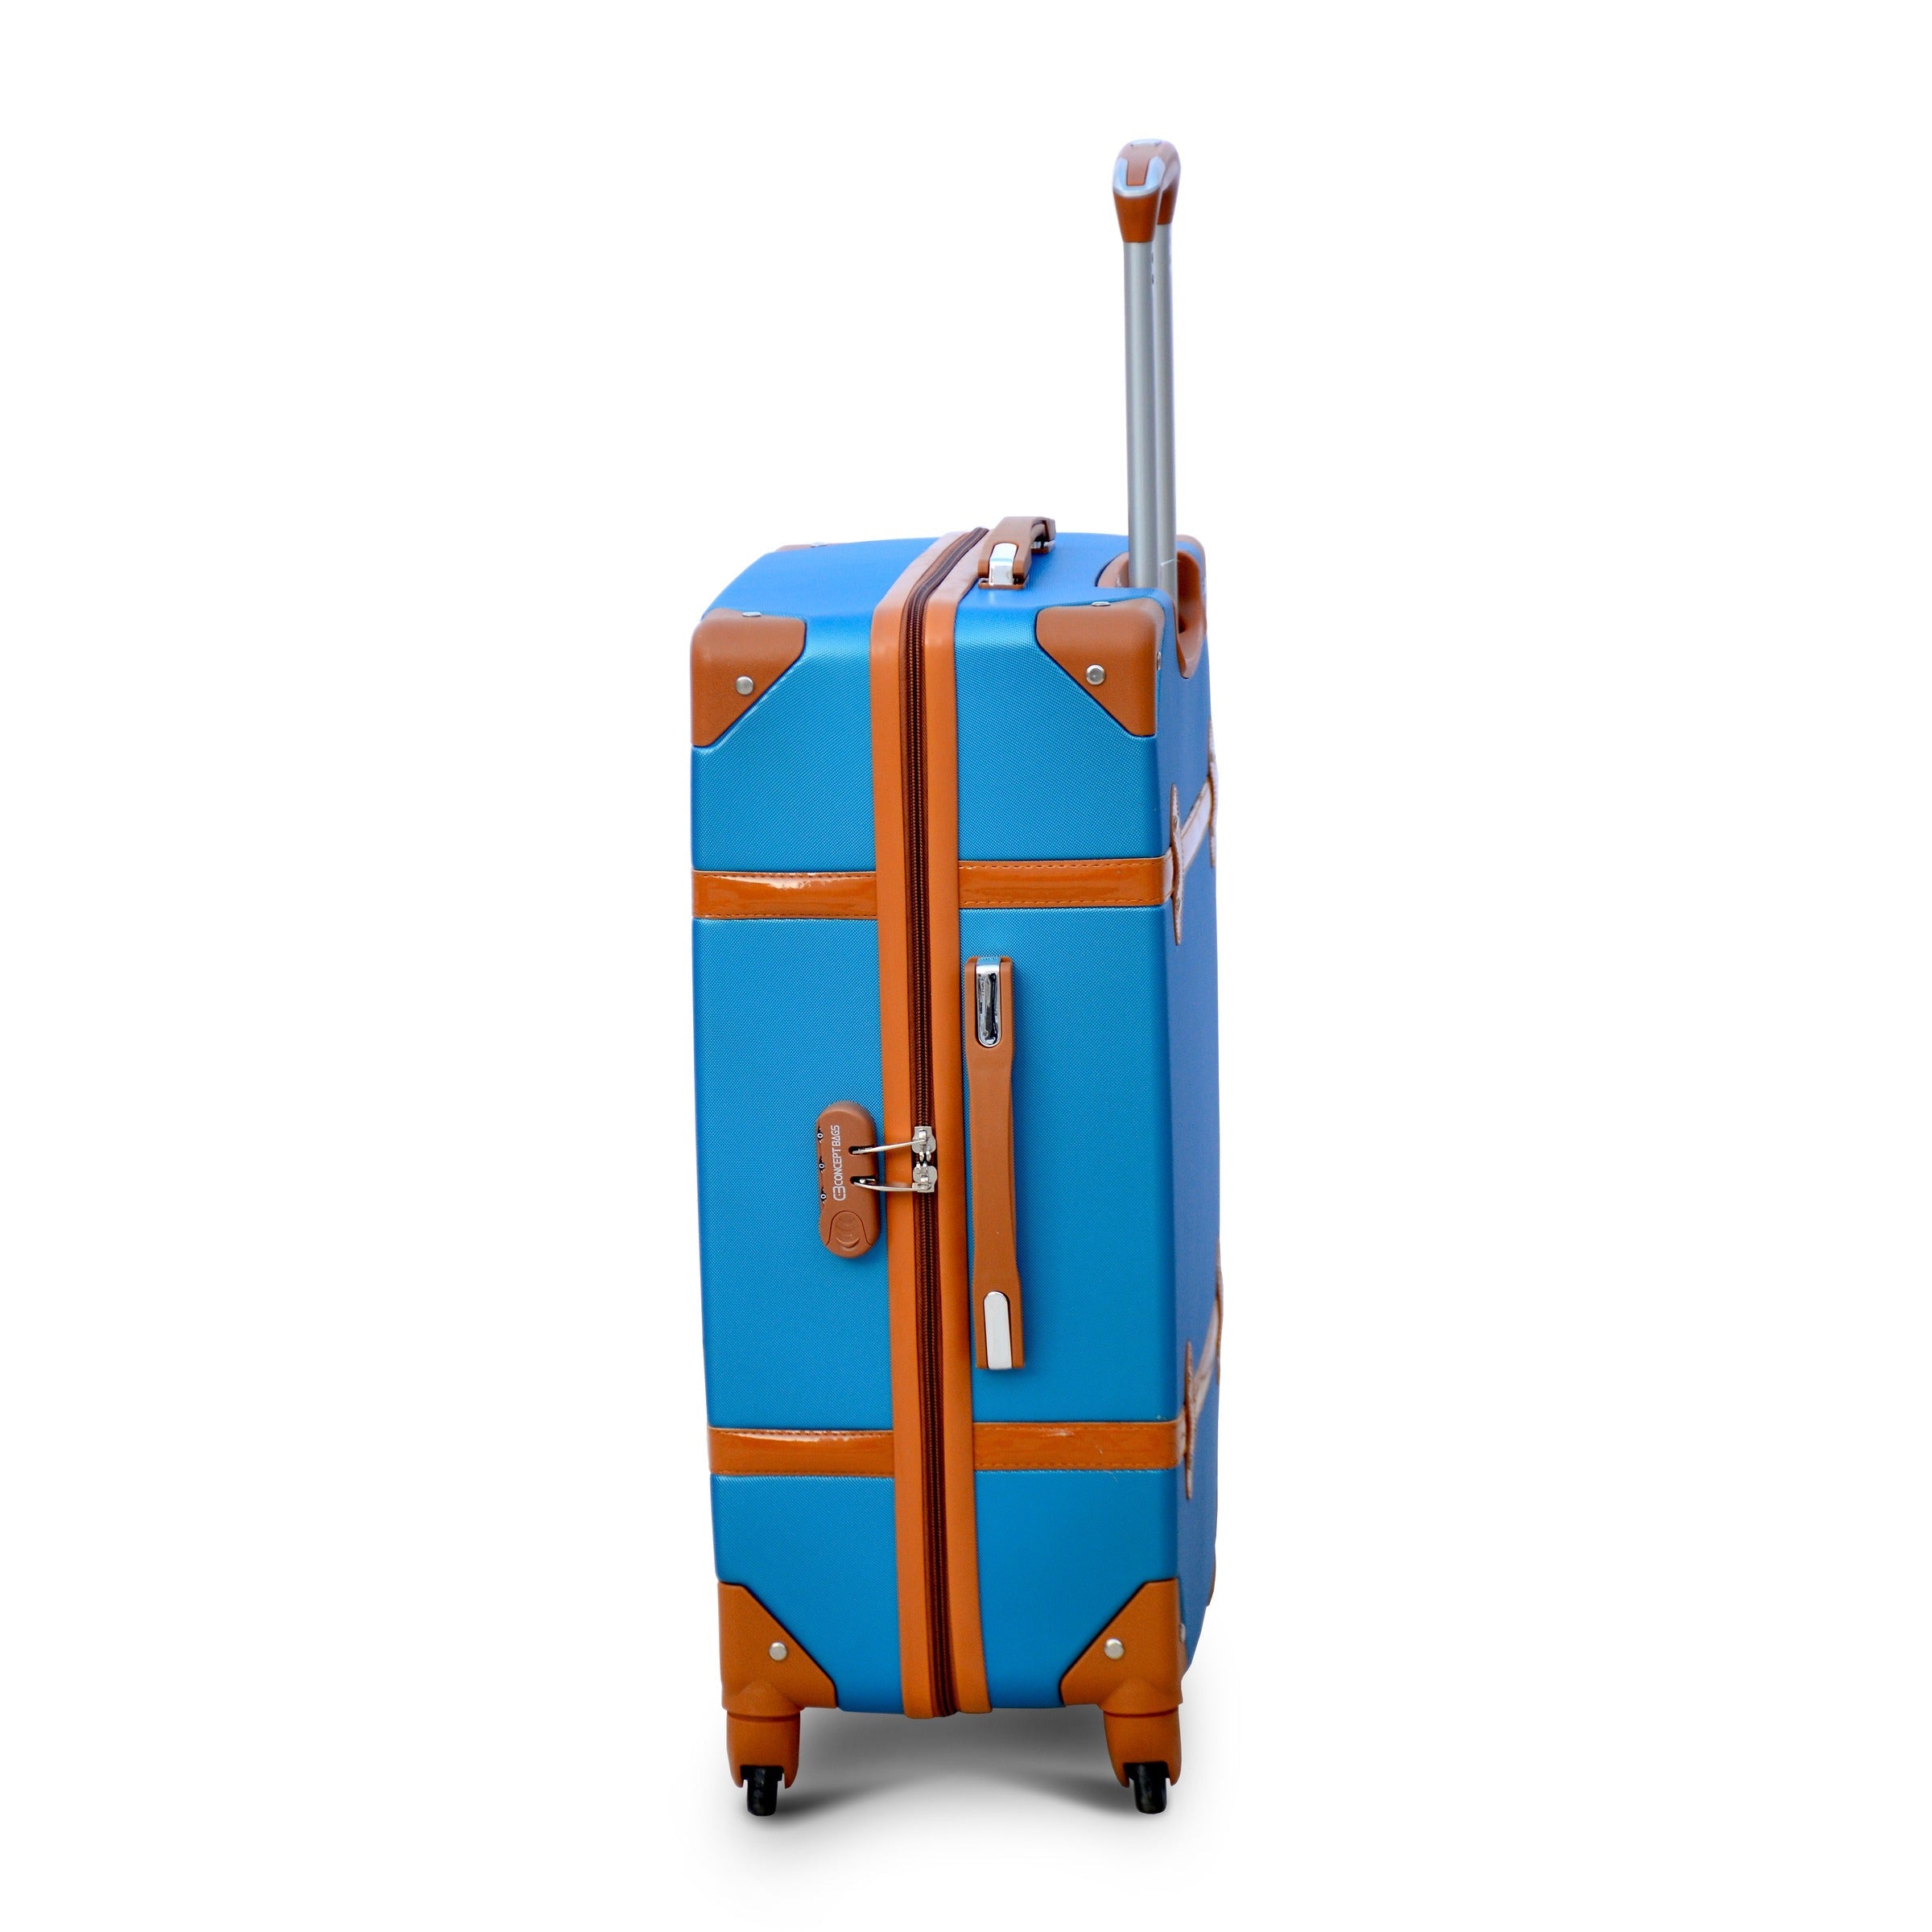 28 Inches Blue Colour Lightweight Corner Guard ABS Luggage Hard Case Trolley Bag